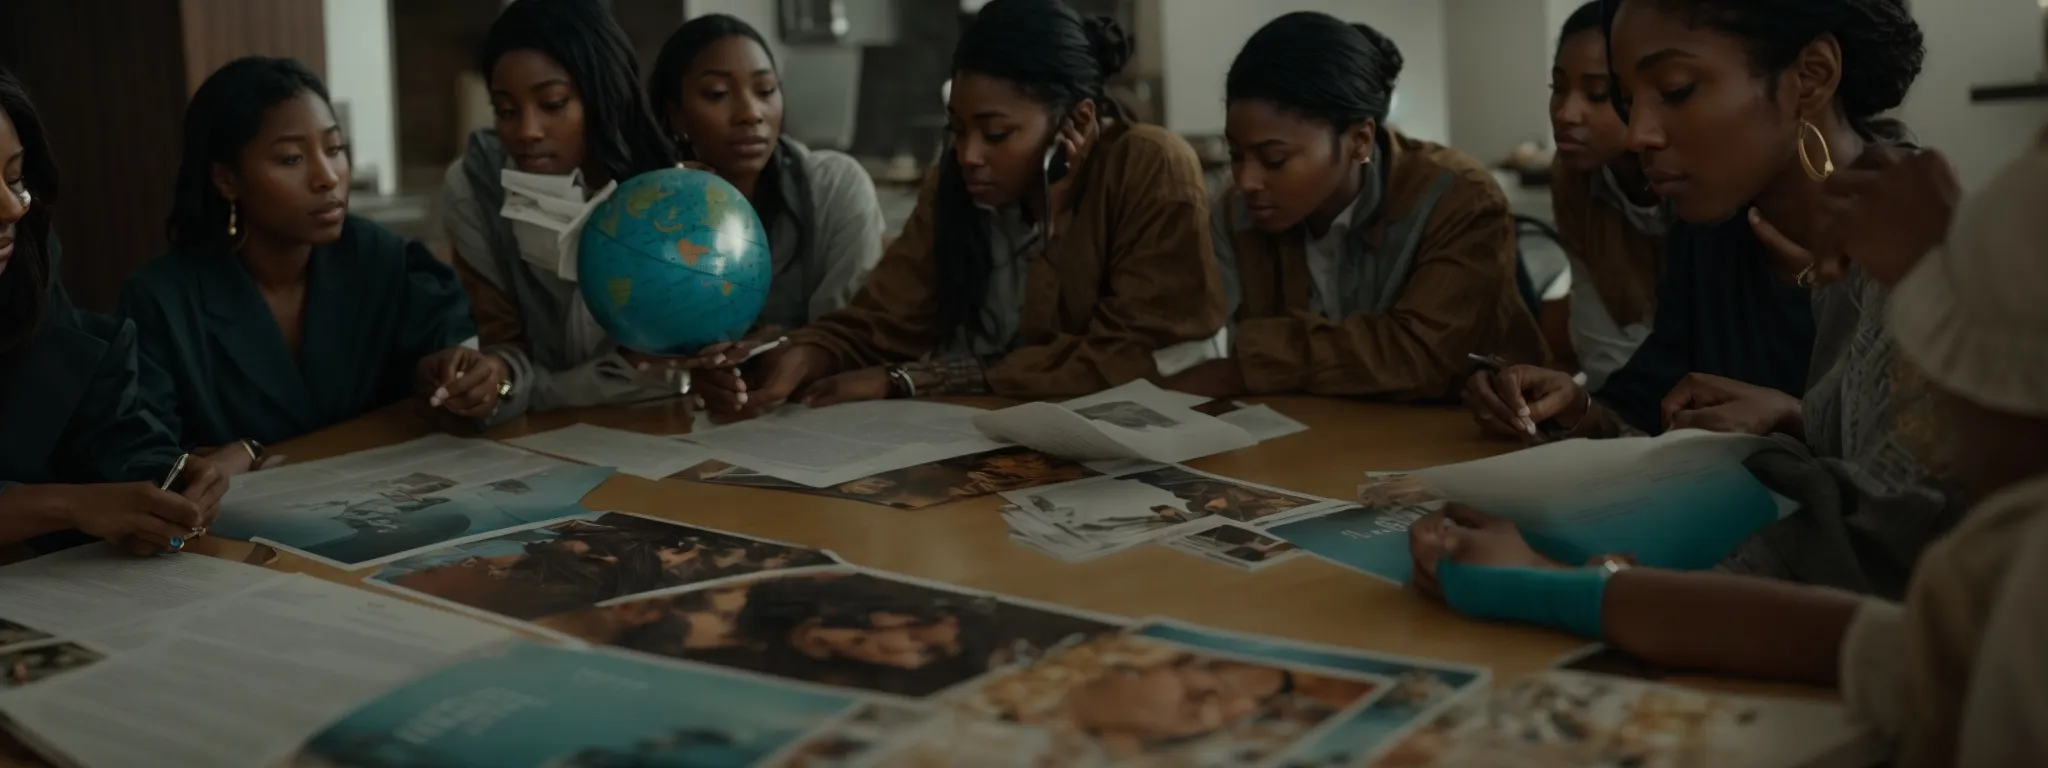 a diverse group of people gathered around a table, examining marketing materials that showcase a variety of cultural elements, while a globe sits prominently in the center.